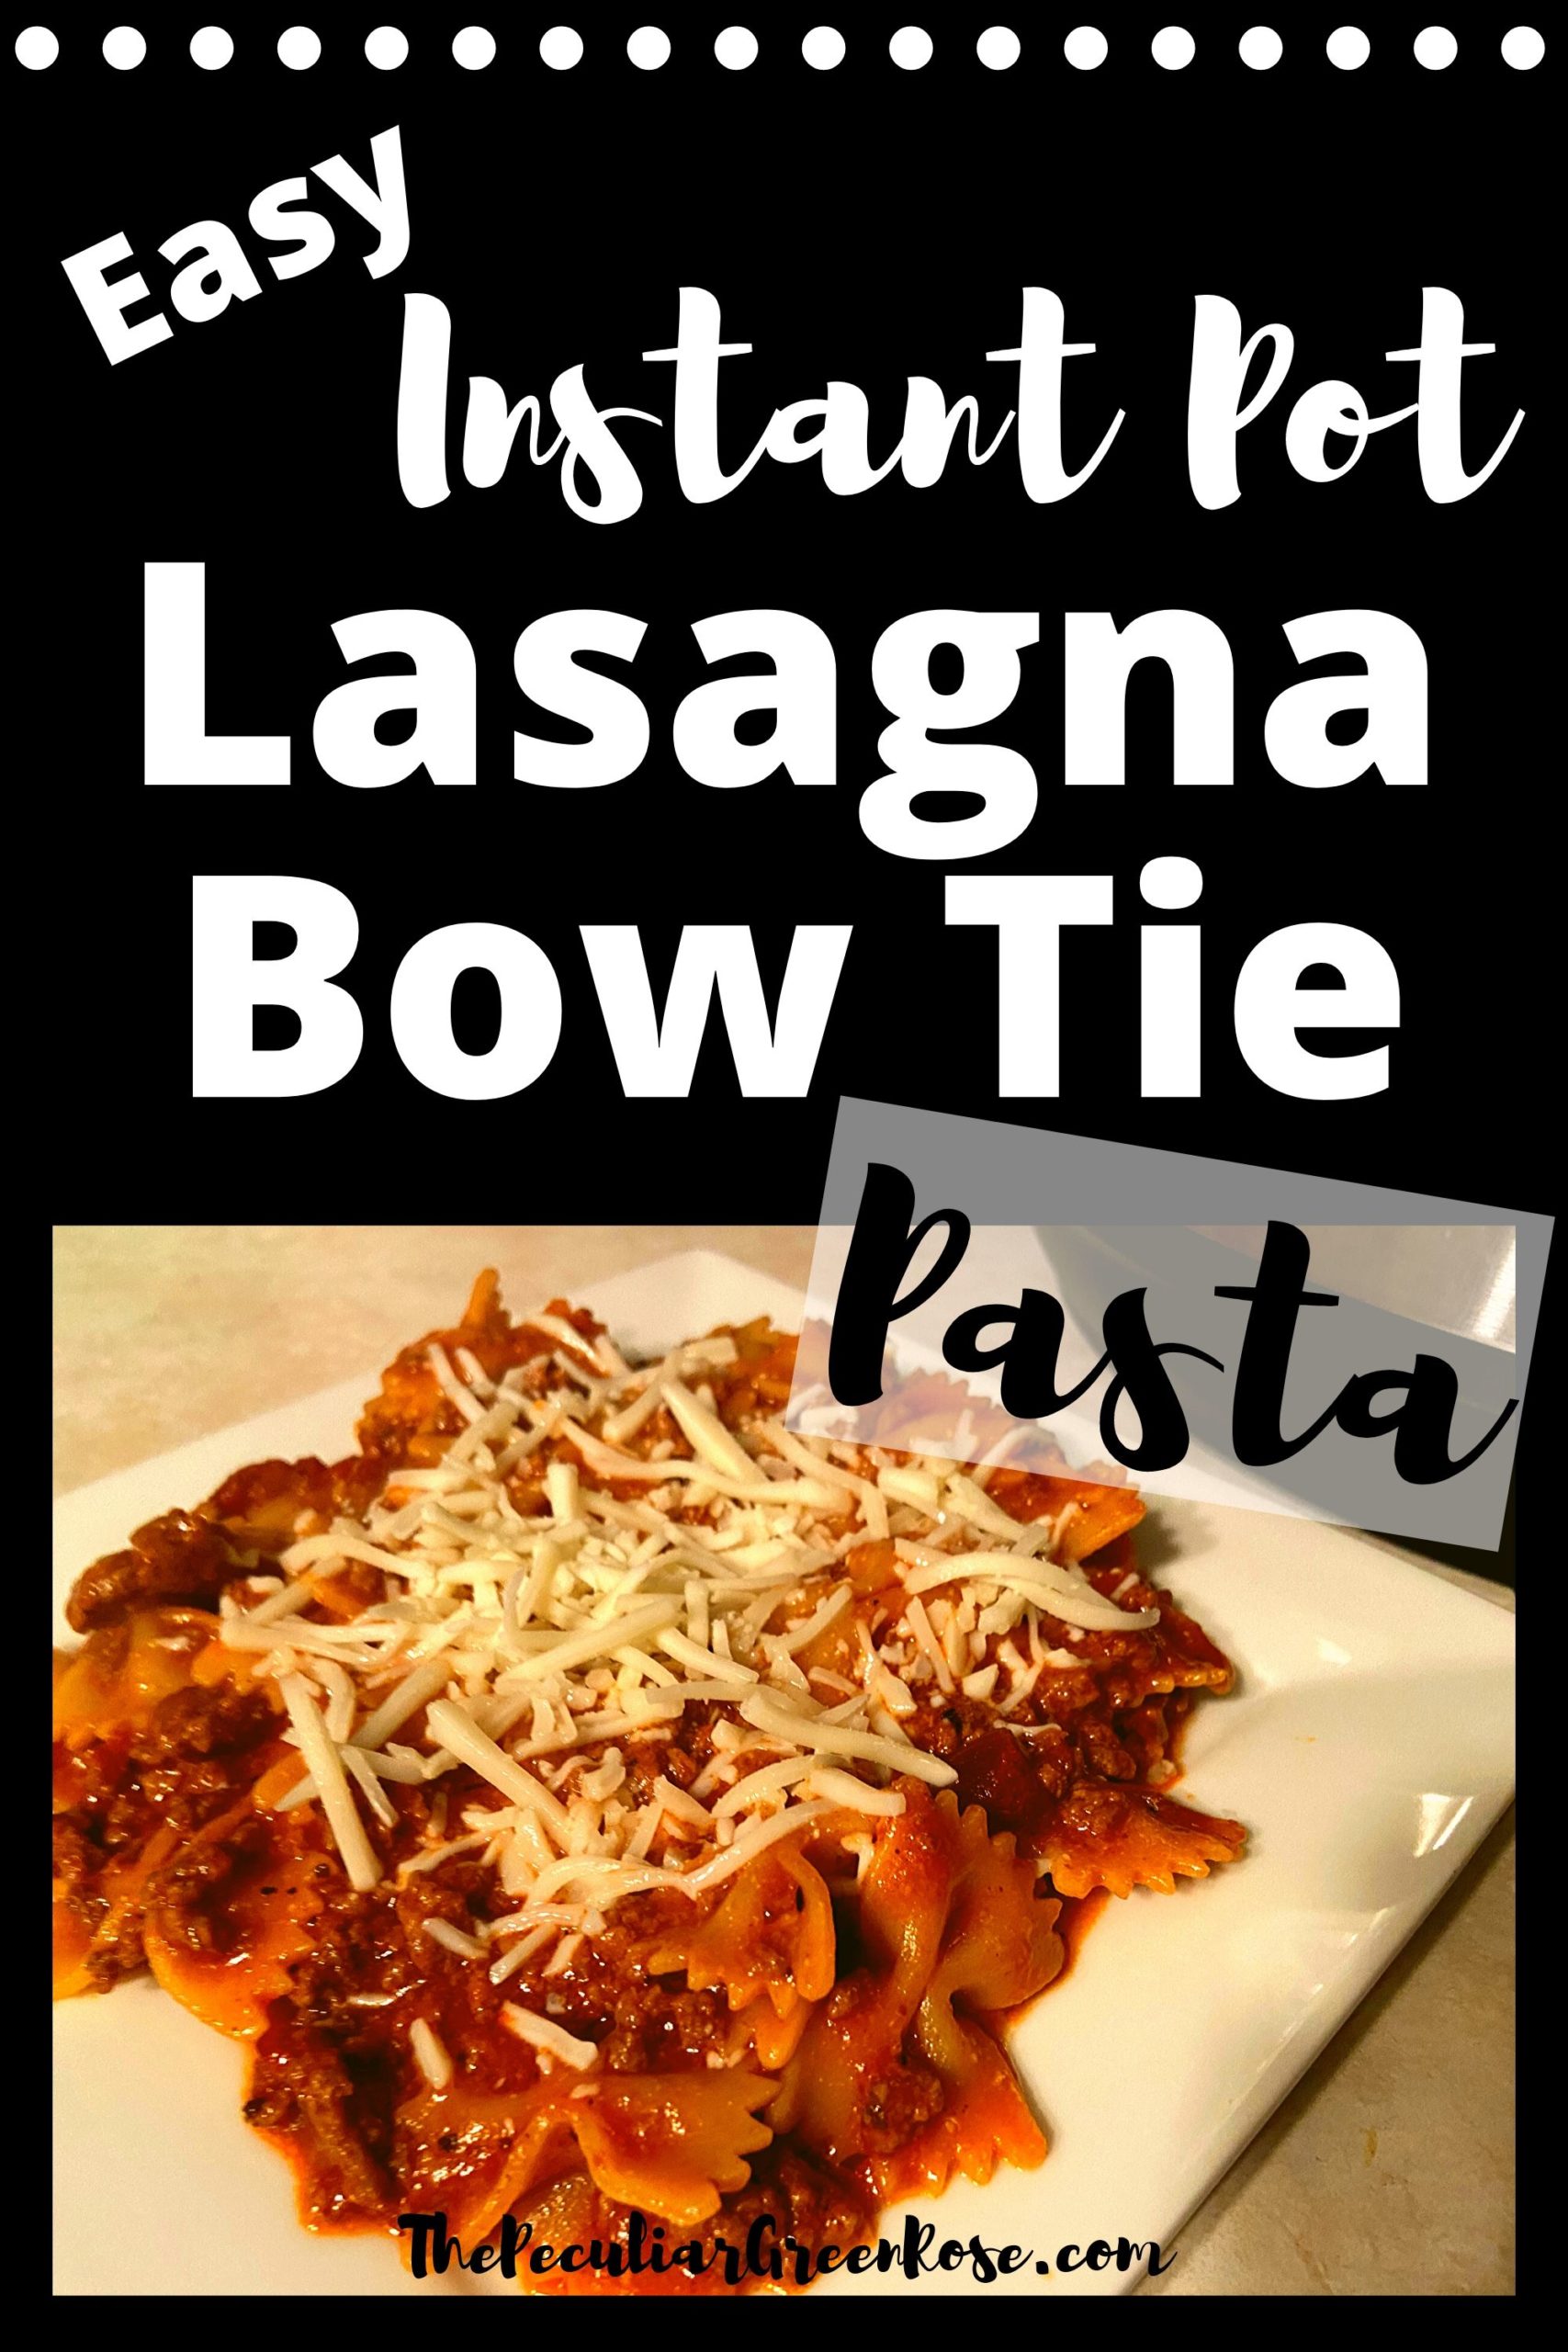 A square white plate filled with Instant Pot Lasagna Bow Tie Pasta topped with shredded mozzarella cheese sitting in front of an Instant pot on a kitchen counter.